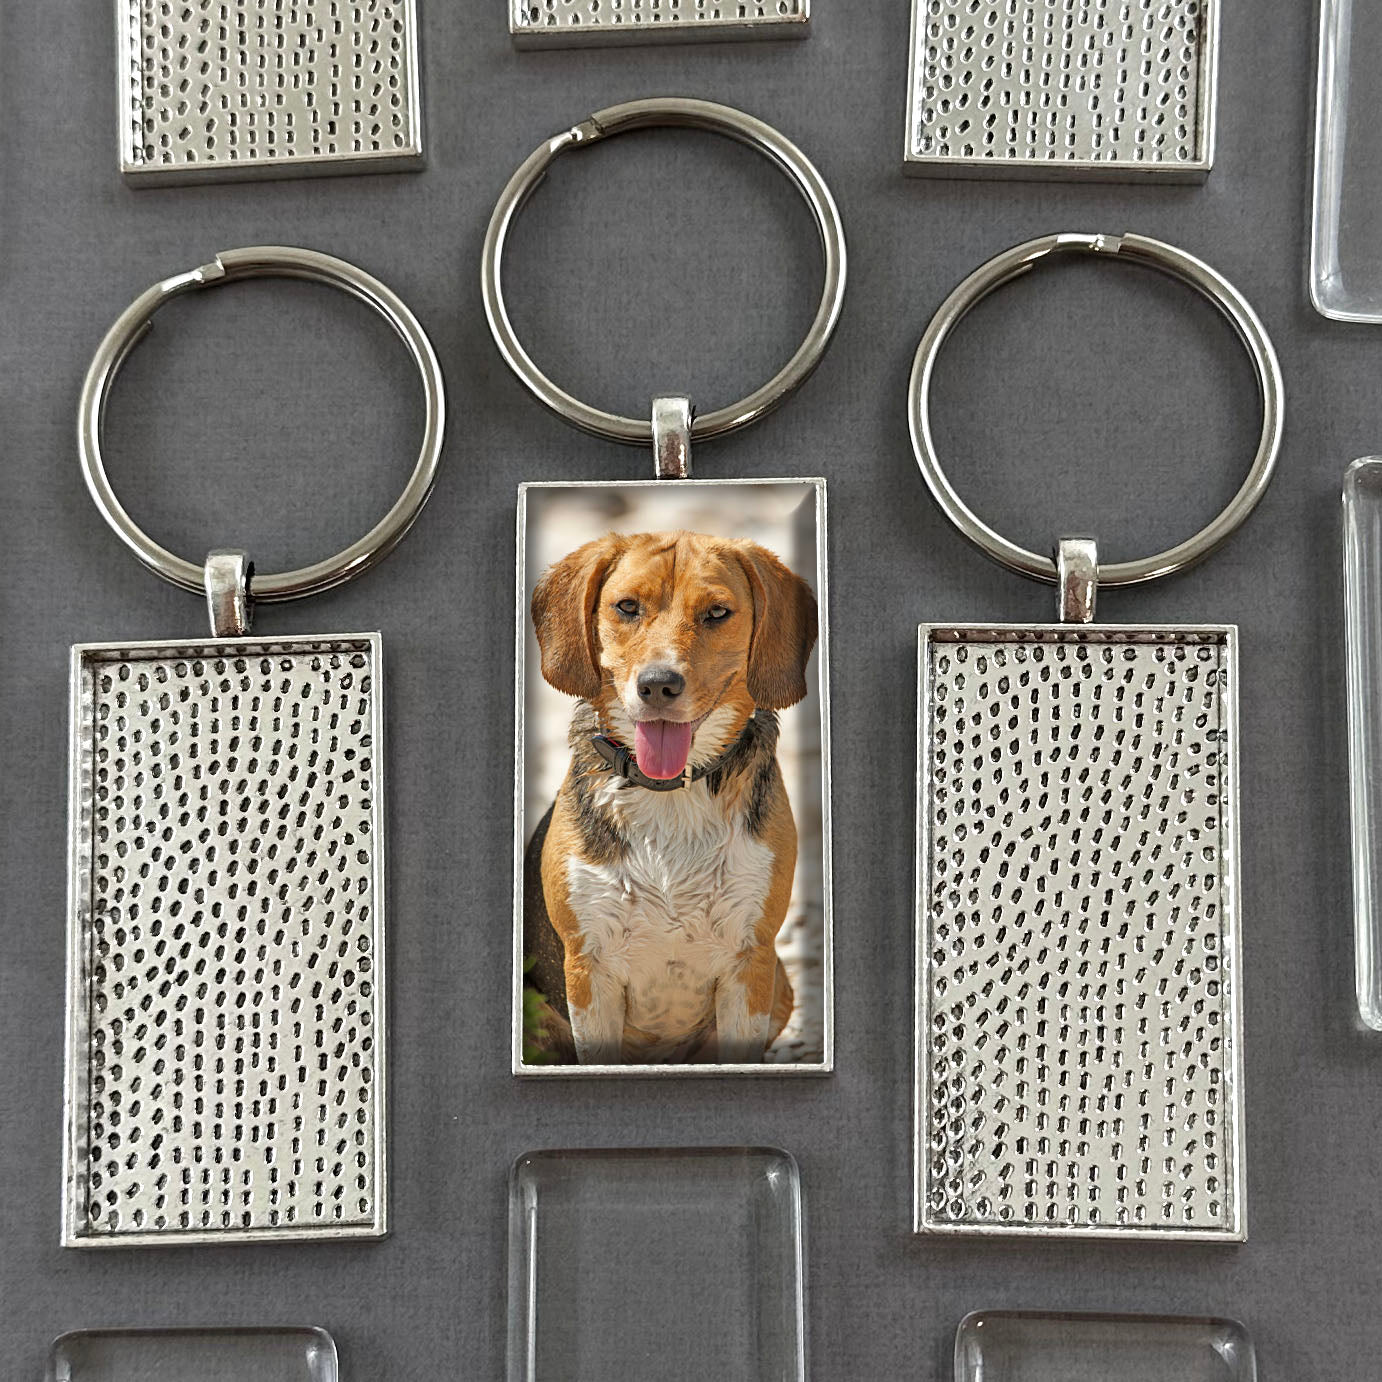 Grand dog PHOTO HOLDER Metal Antique Cheese Grater with Clip Picture Frame  4x6 Grand kids